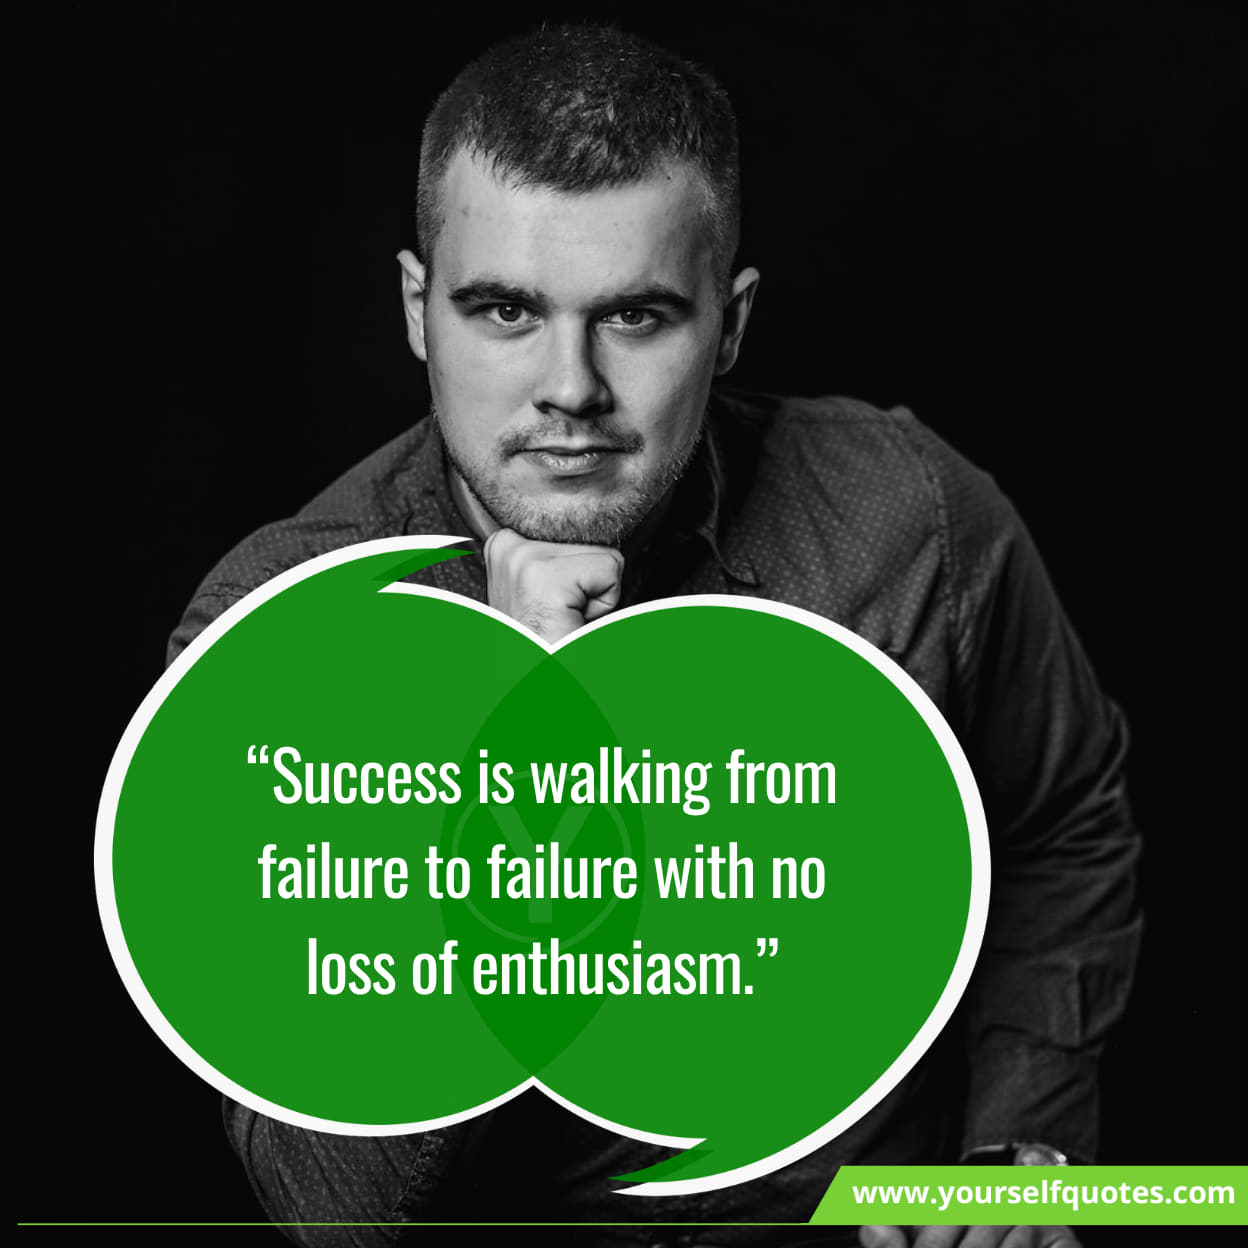 Best Quotes On Being Successful